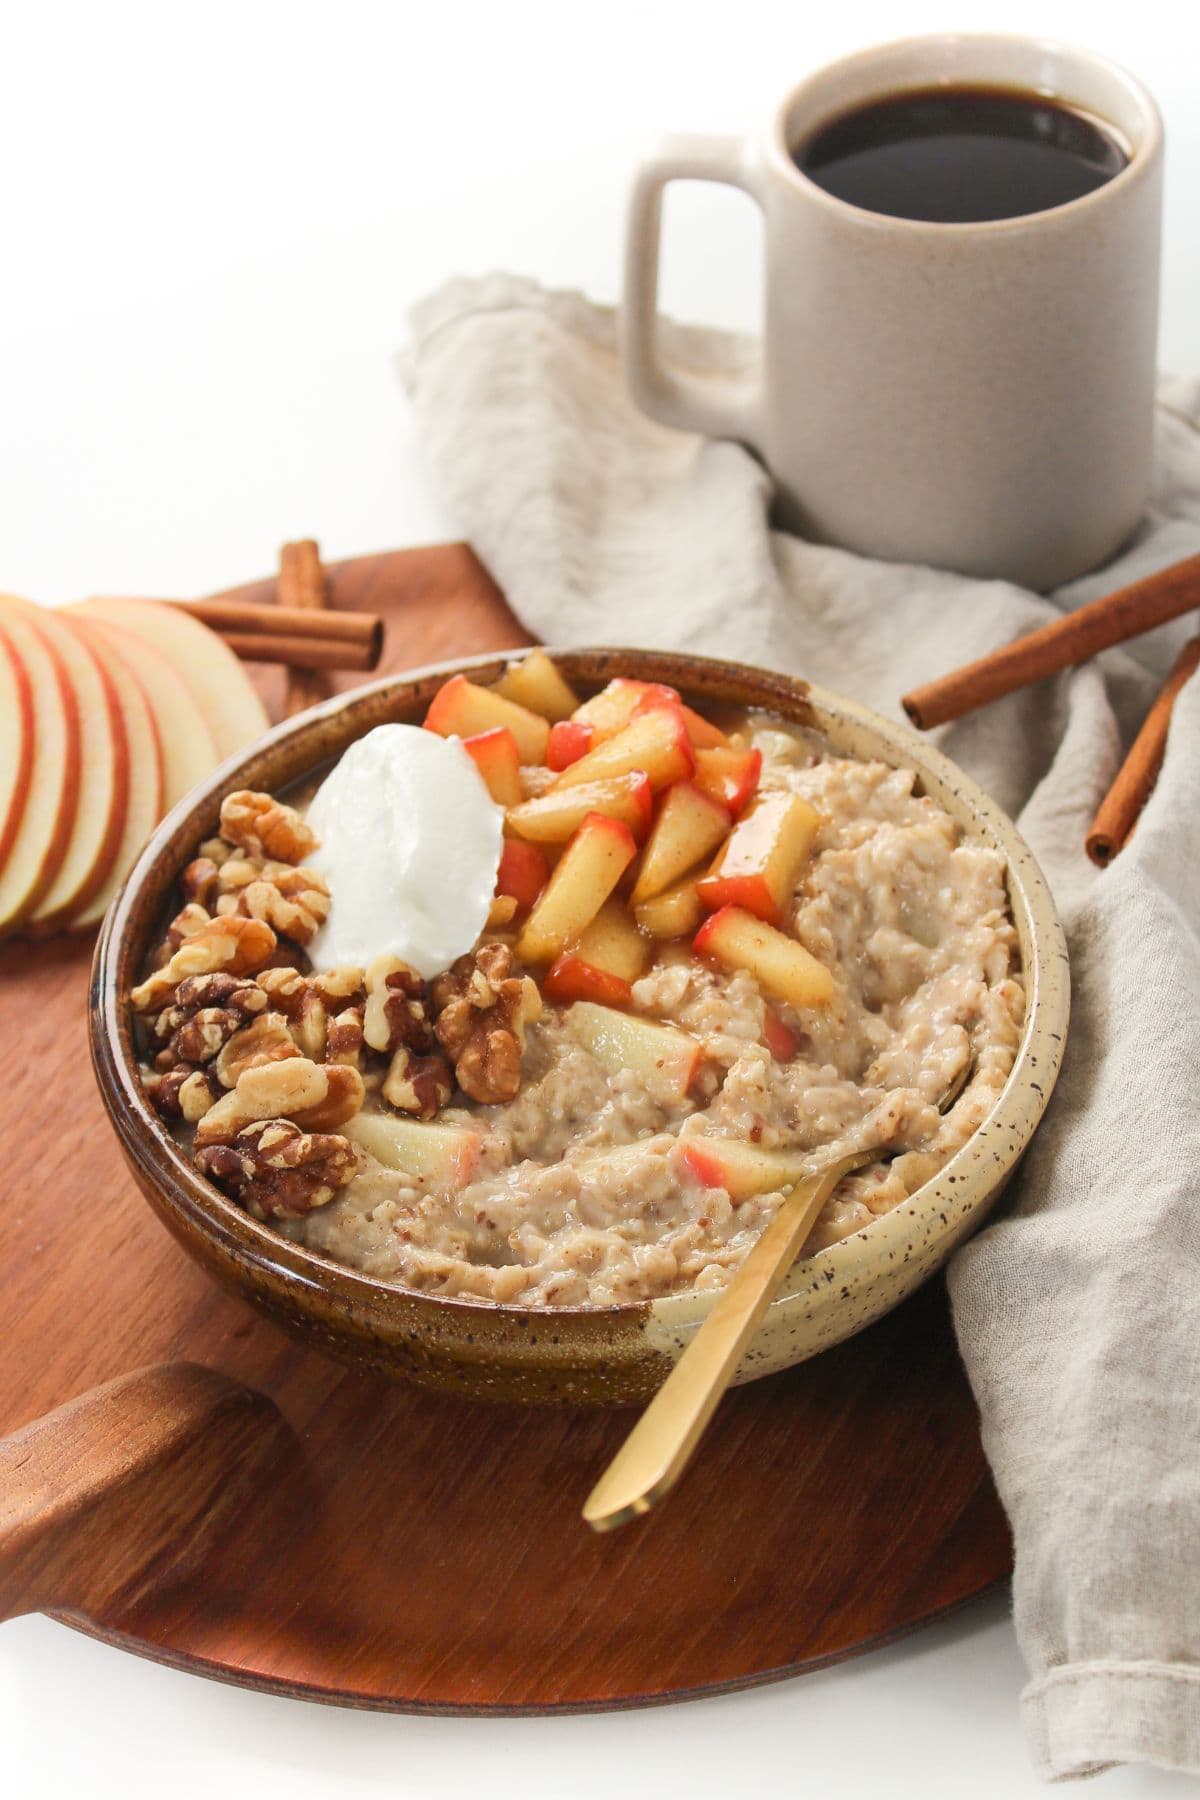 Apple cinnamon oatmeal in a bowl with a cup of coffee